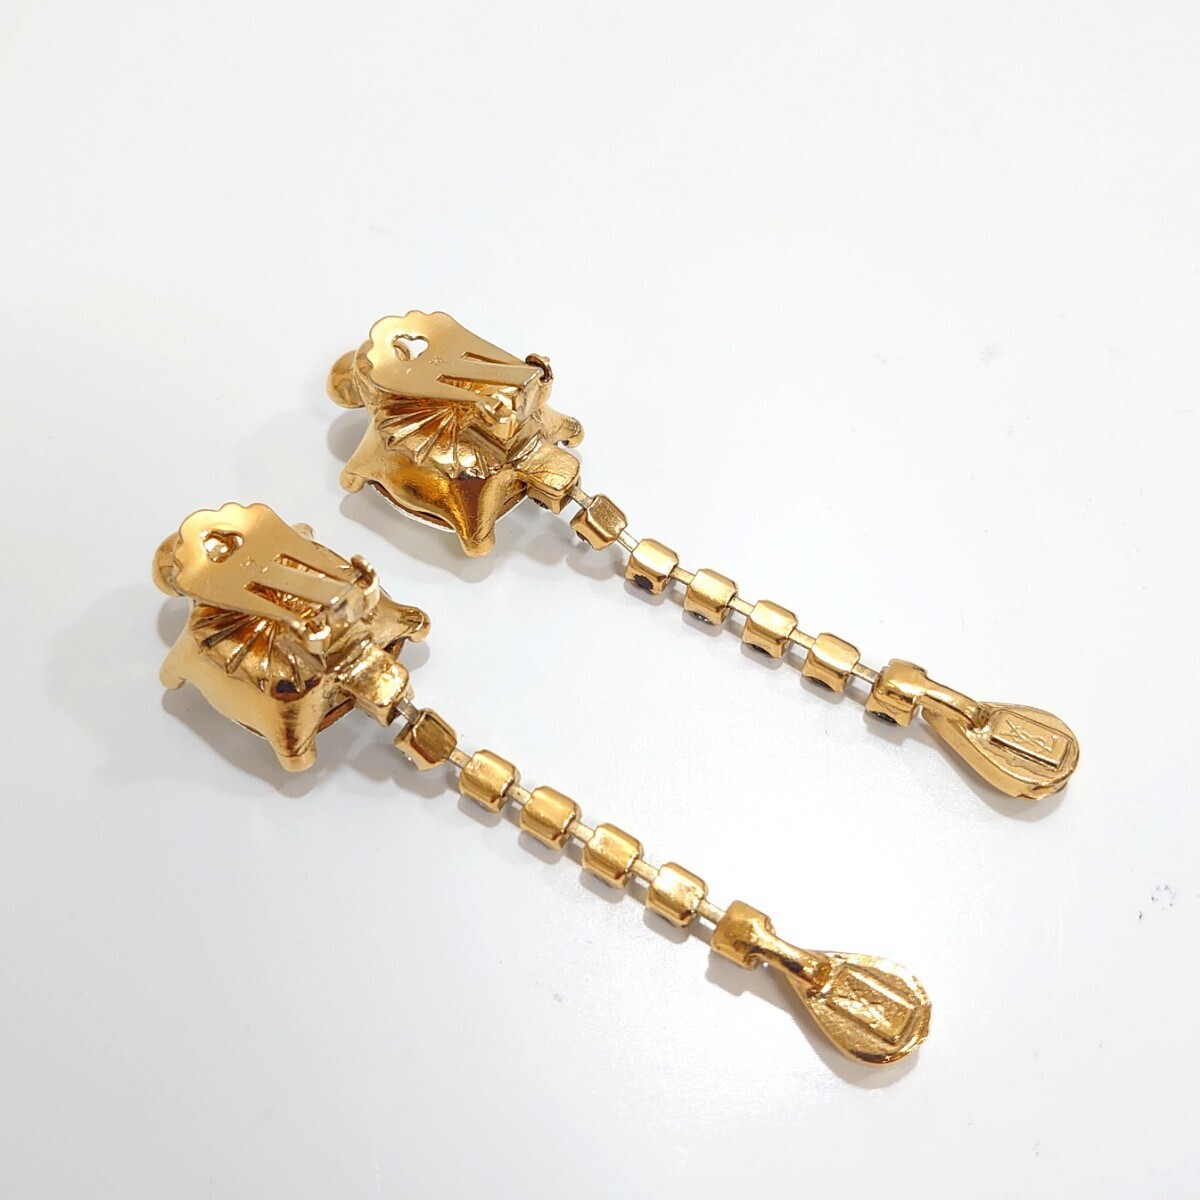  ultimate beautiful goods YSL sun rolan color stone swing earrings Gold rhinestone extra-large Vintage accessory .. luck with money length .